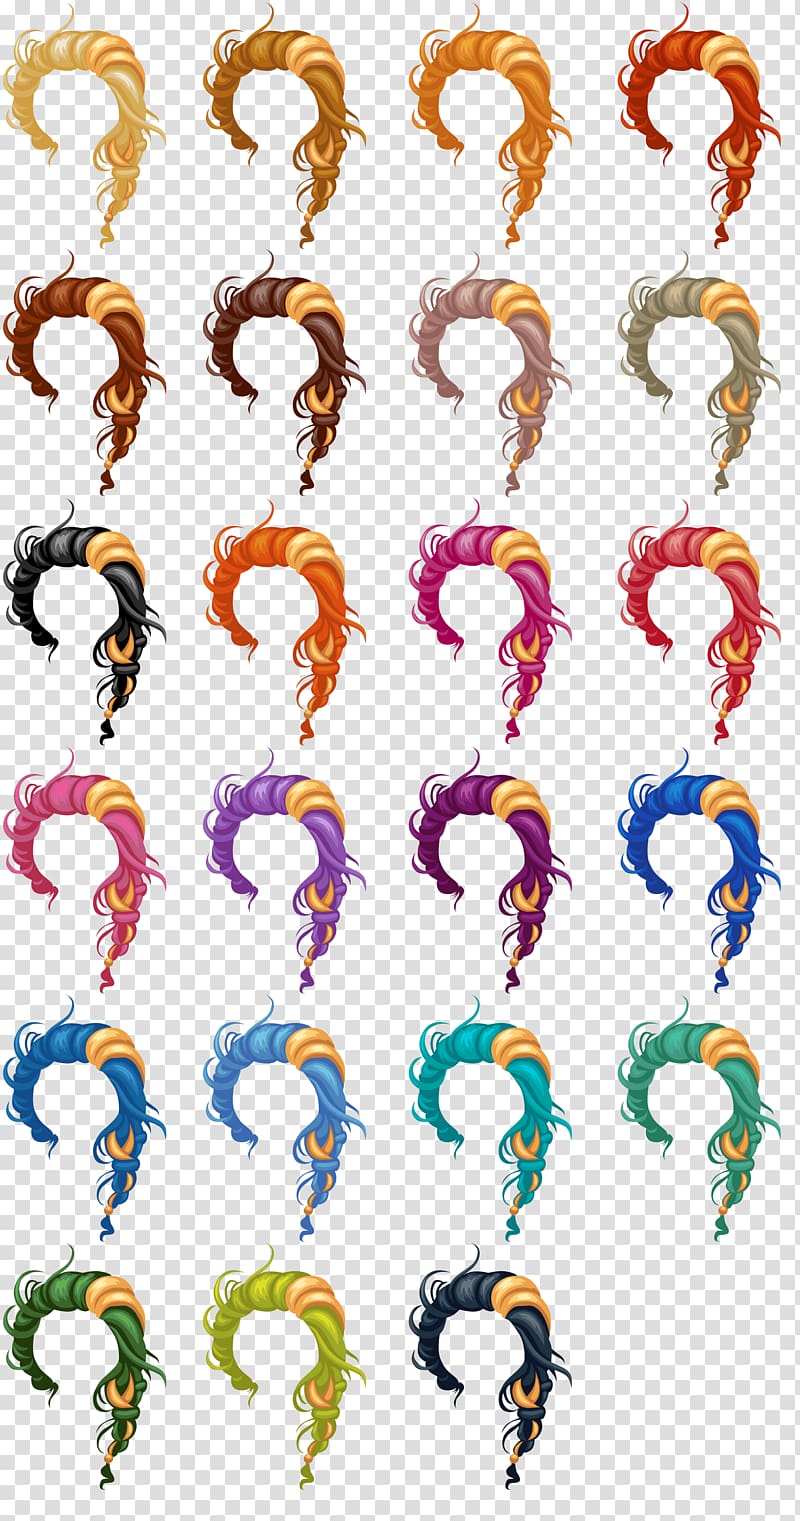 Hairstyle French braid Clothing Face Make-up, others transparent background PNG clipart